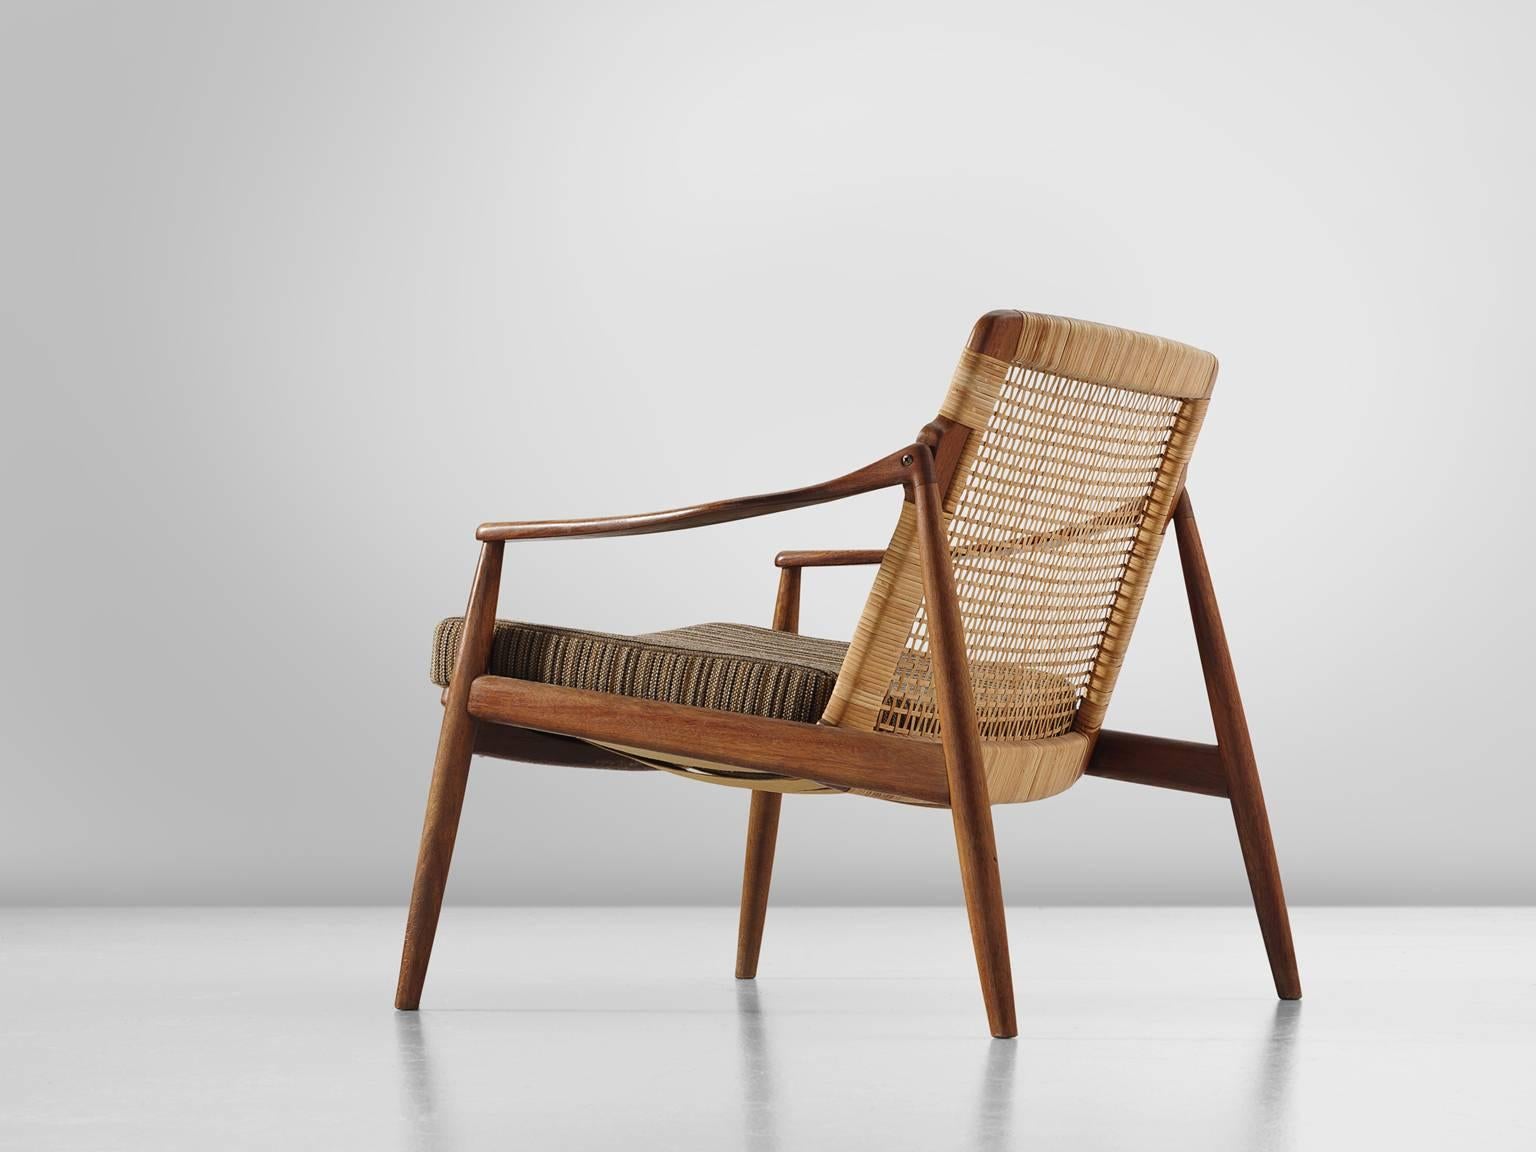 Armchair, teak and rattan, Hartmut Lohmeyer, manufactured by Wilkhahn, teak, cane, striped brown beige upholstery, Germany, design 1956, production 1960s.

This low reclining armchair is sensuous and is organically shaped. They feature a slightly